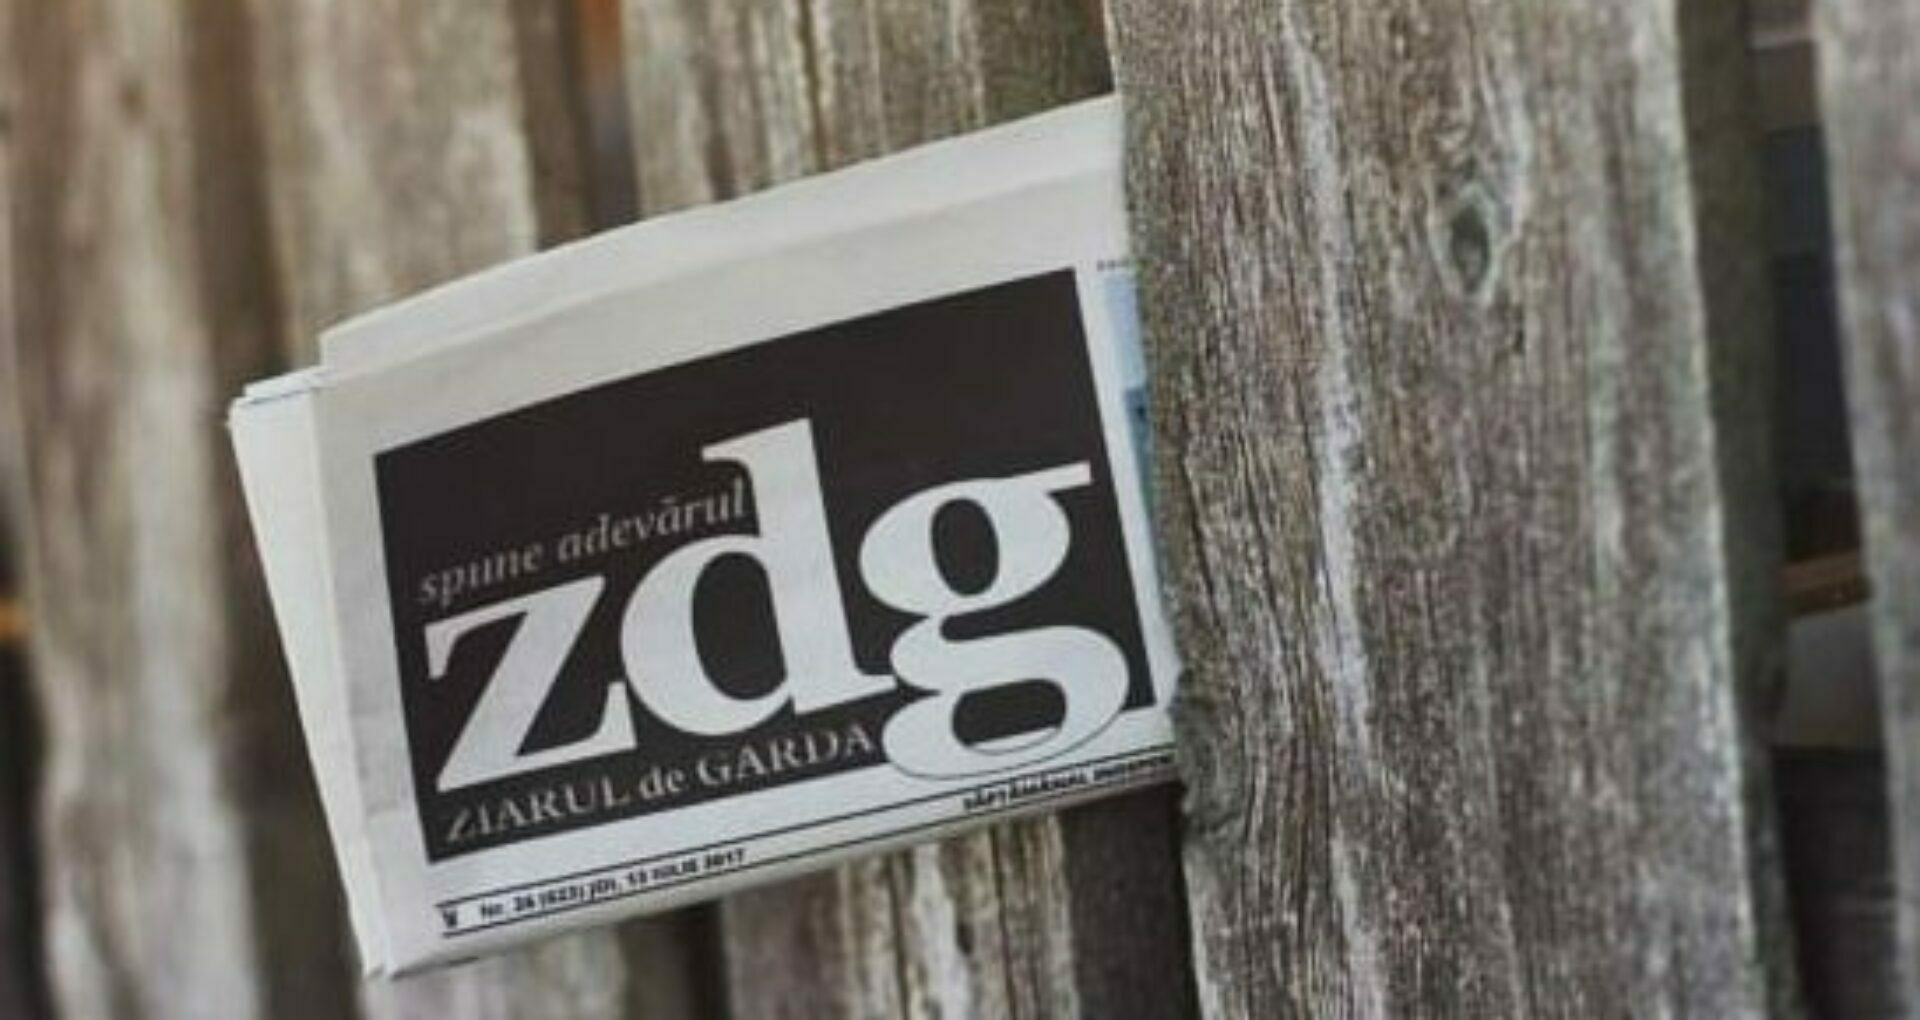 ZdG’s Statement on Taking Over the Copyrighted Texts